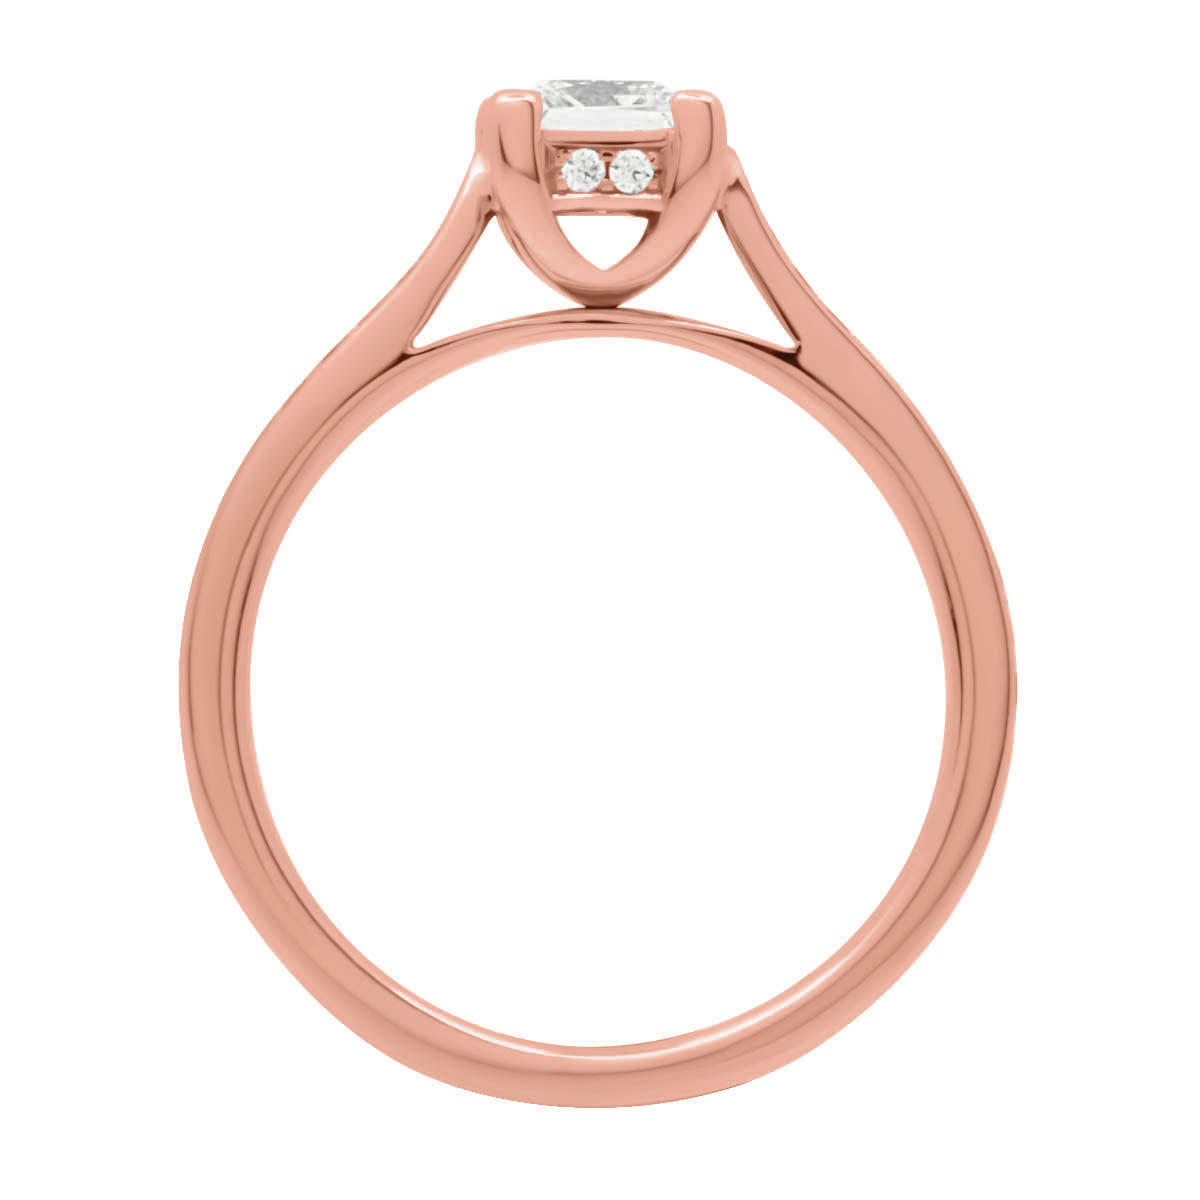 Chevron Claw Engagement Ring  made of rose gold in an angled position